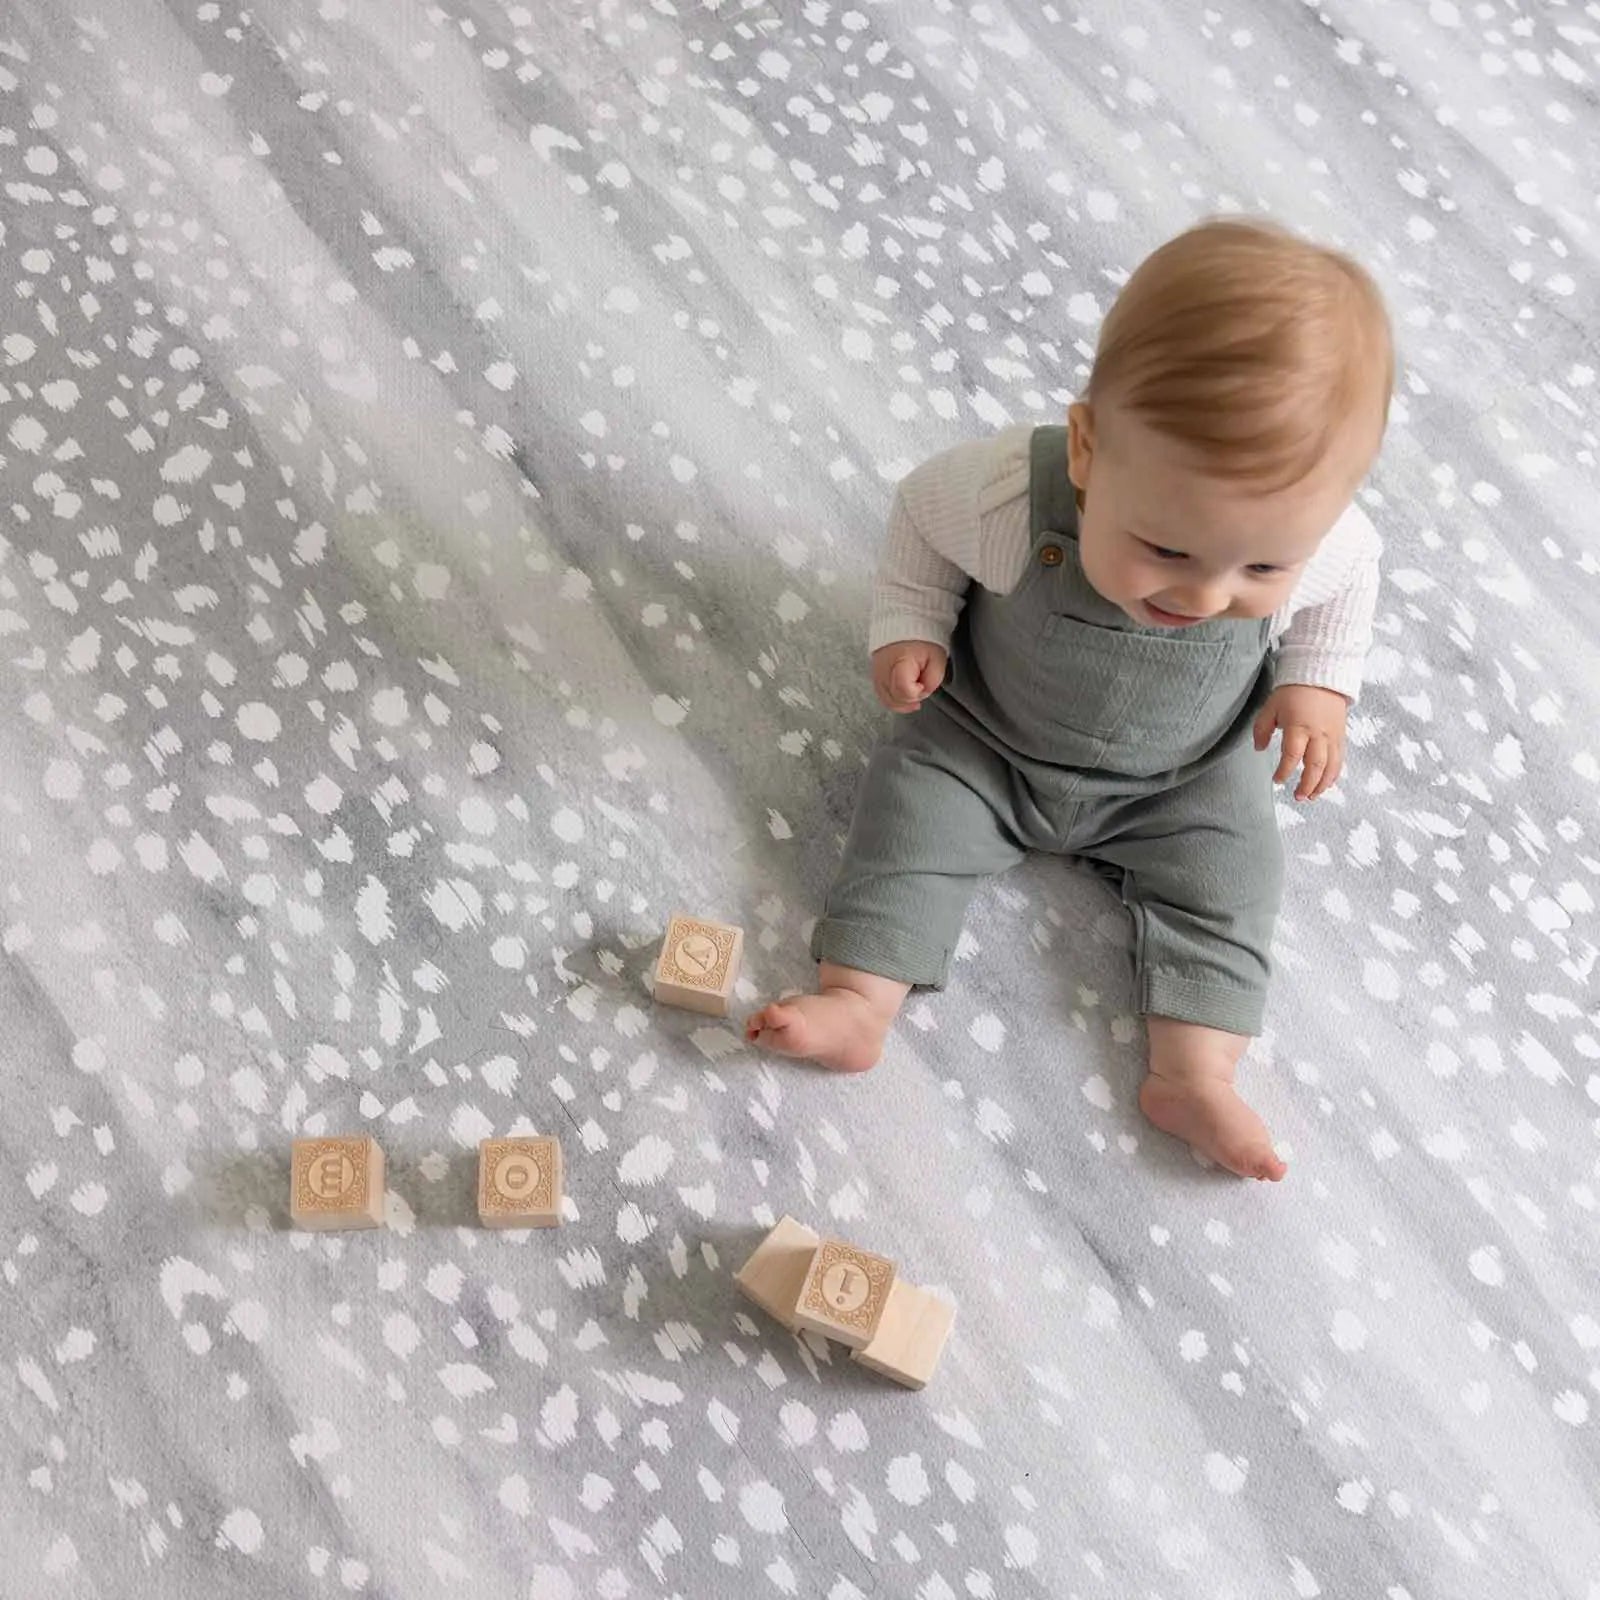 Magic happens when you set up your House of Noa Play Mat! Shop one of our  fave neutrals, “Pebble” now! 🎥 @_kaitlynbrown #houseofnoa…